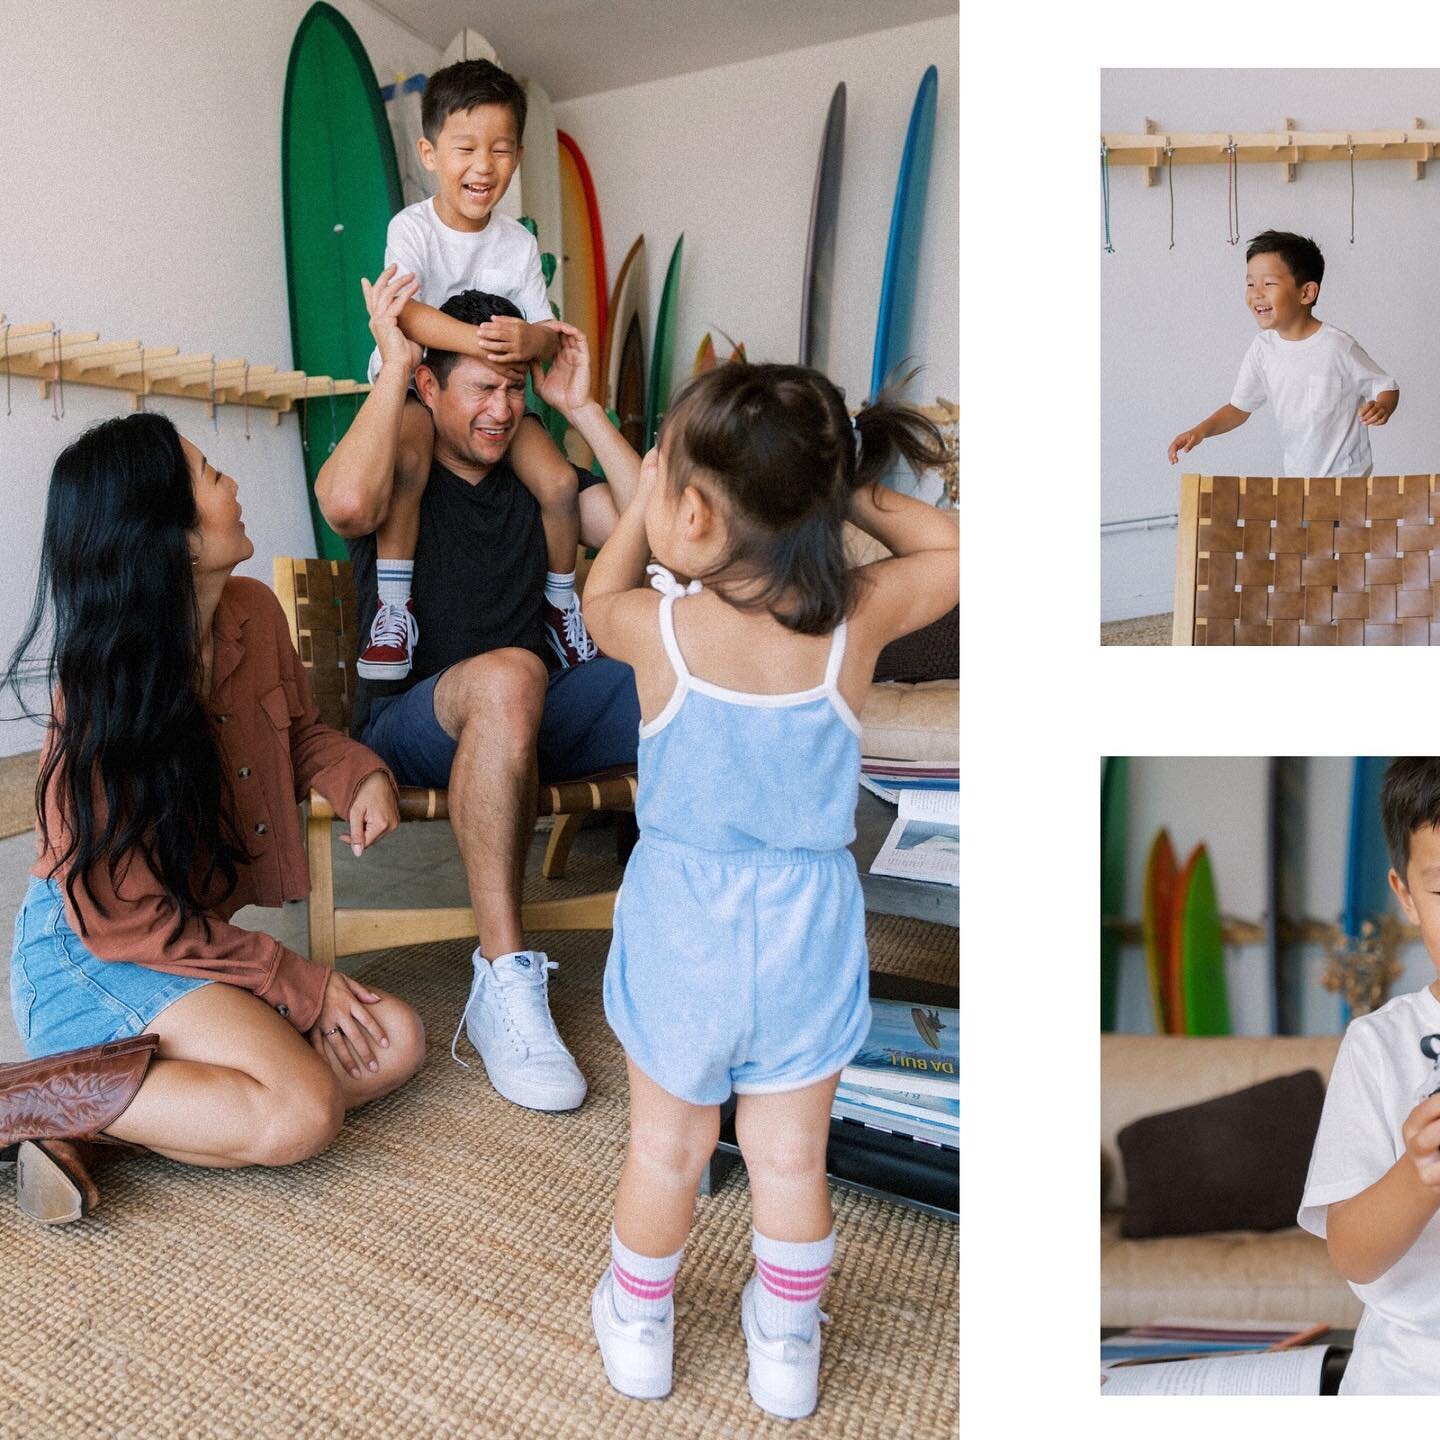 So what do we do during a family session? My kids won&rsquo;t sit still.
Perrrrfect ✨✨ we don&rsquo;t sit still &amp; pose! We hang out 🫶

.
.
.

#pasadenafamilyphotographer #ocfamilyphotographer #lafamilyphotographer #socalfamilyphotographer  #losa